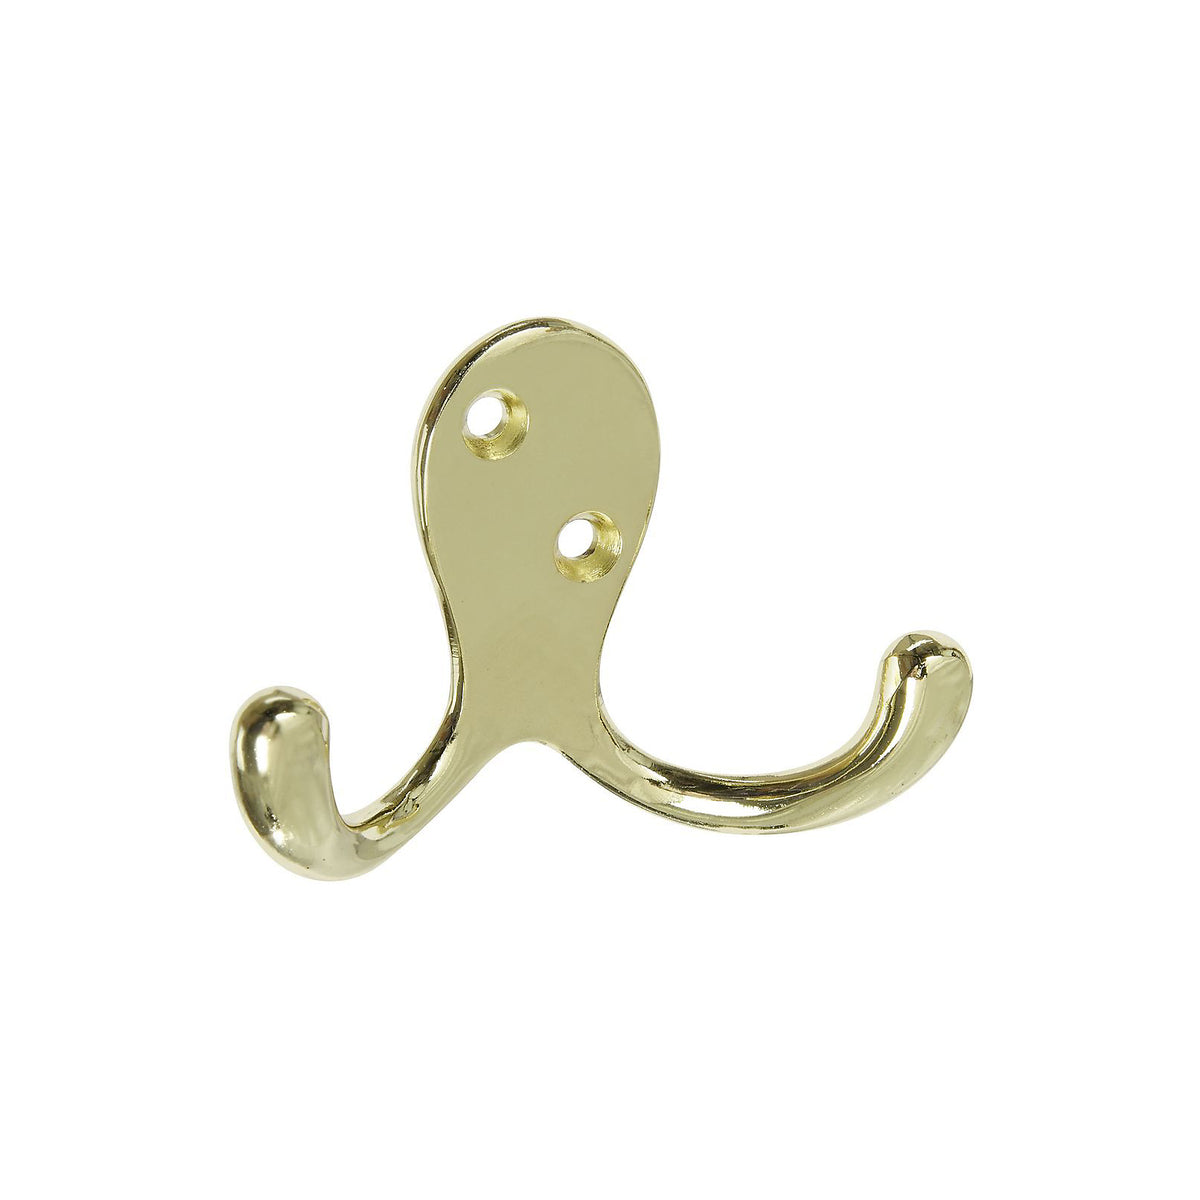 buy robe & hooks at cheap rate in bulk. wholesale & retail construction hardware supplies store. home décor ideas, maintenance, repair replacement parts